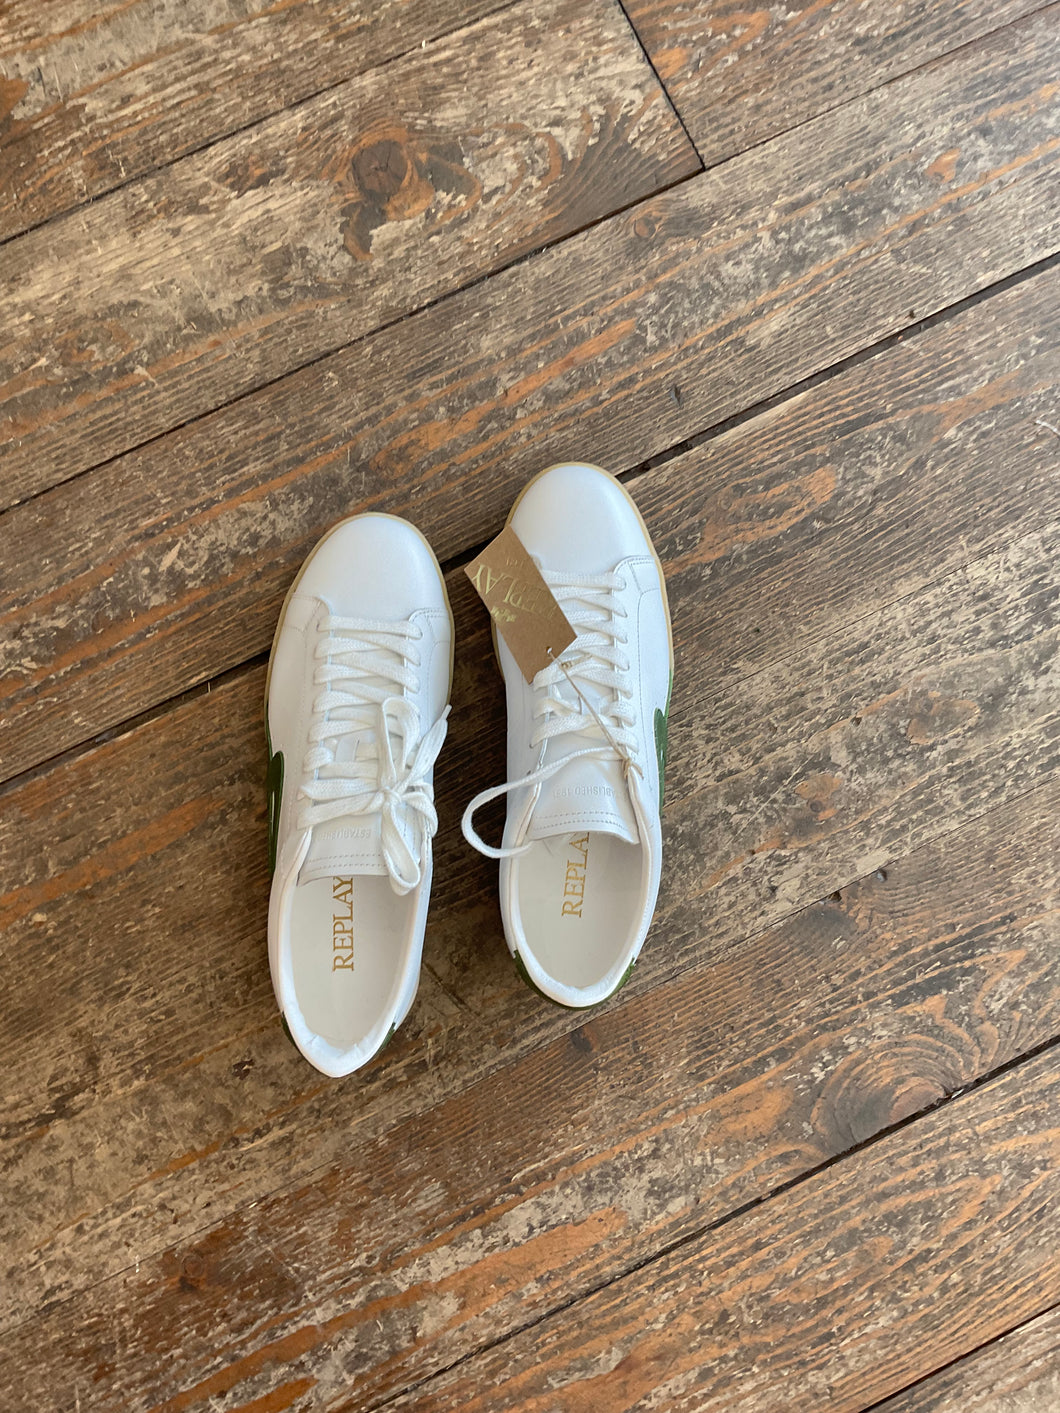 Replay Newtown Olive Green Accent Sneakers